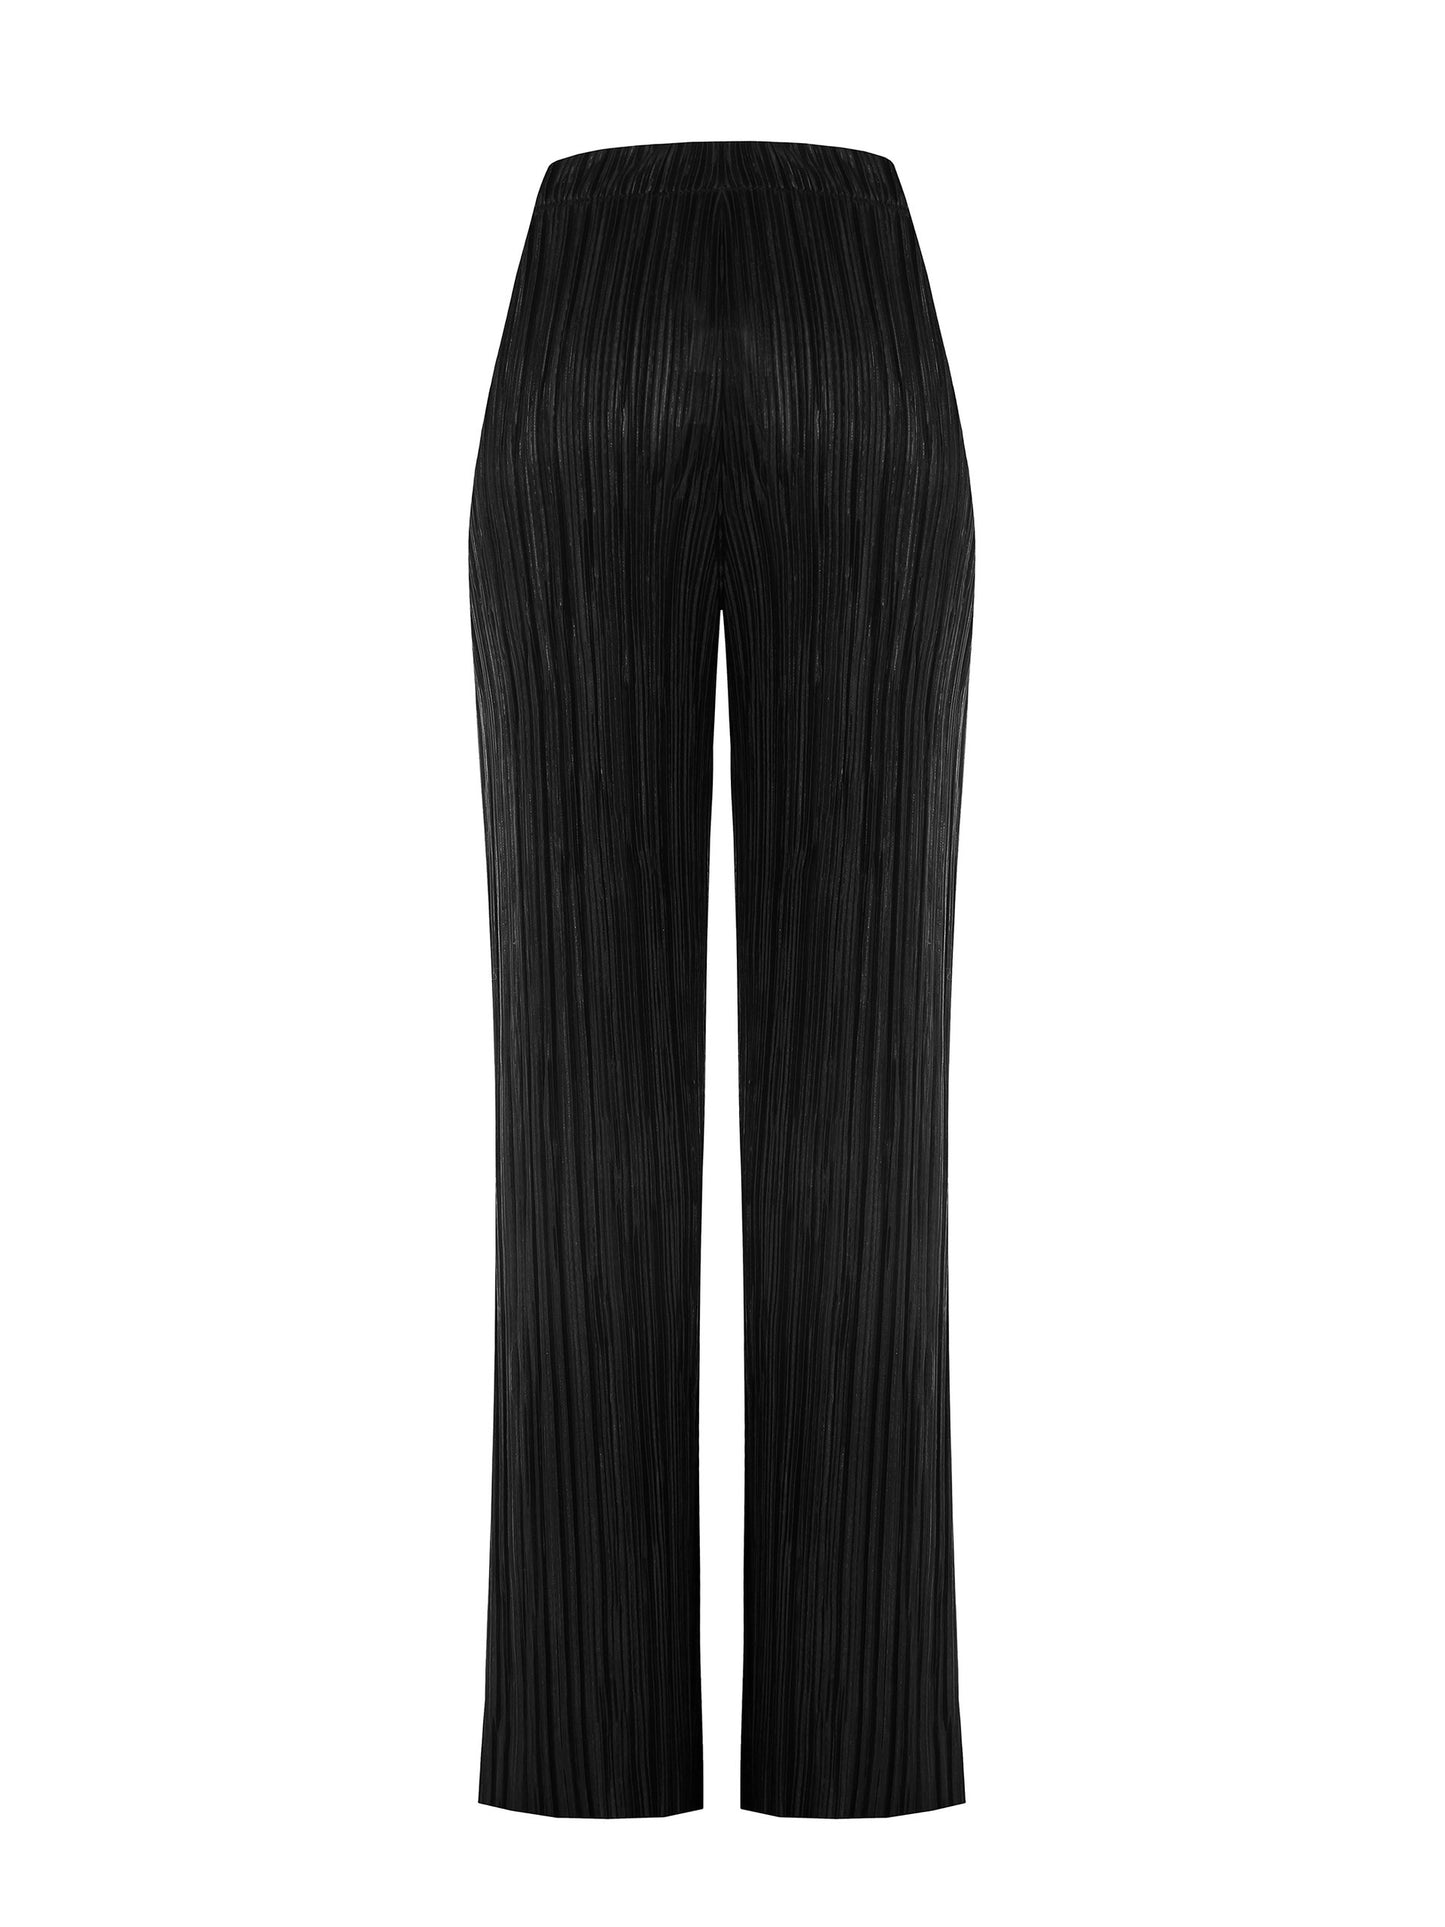 Pleated Satin Palazzo Trousers with Elasticated Waistband